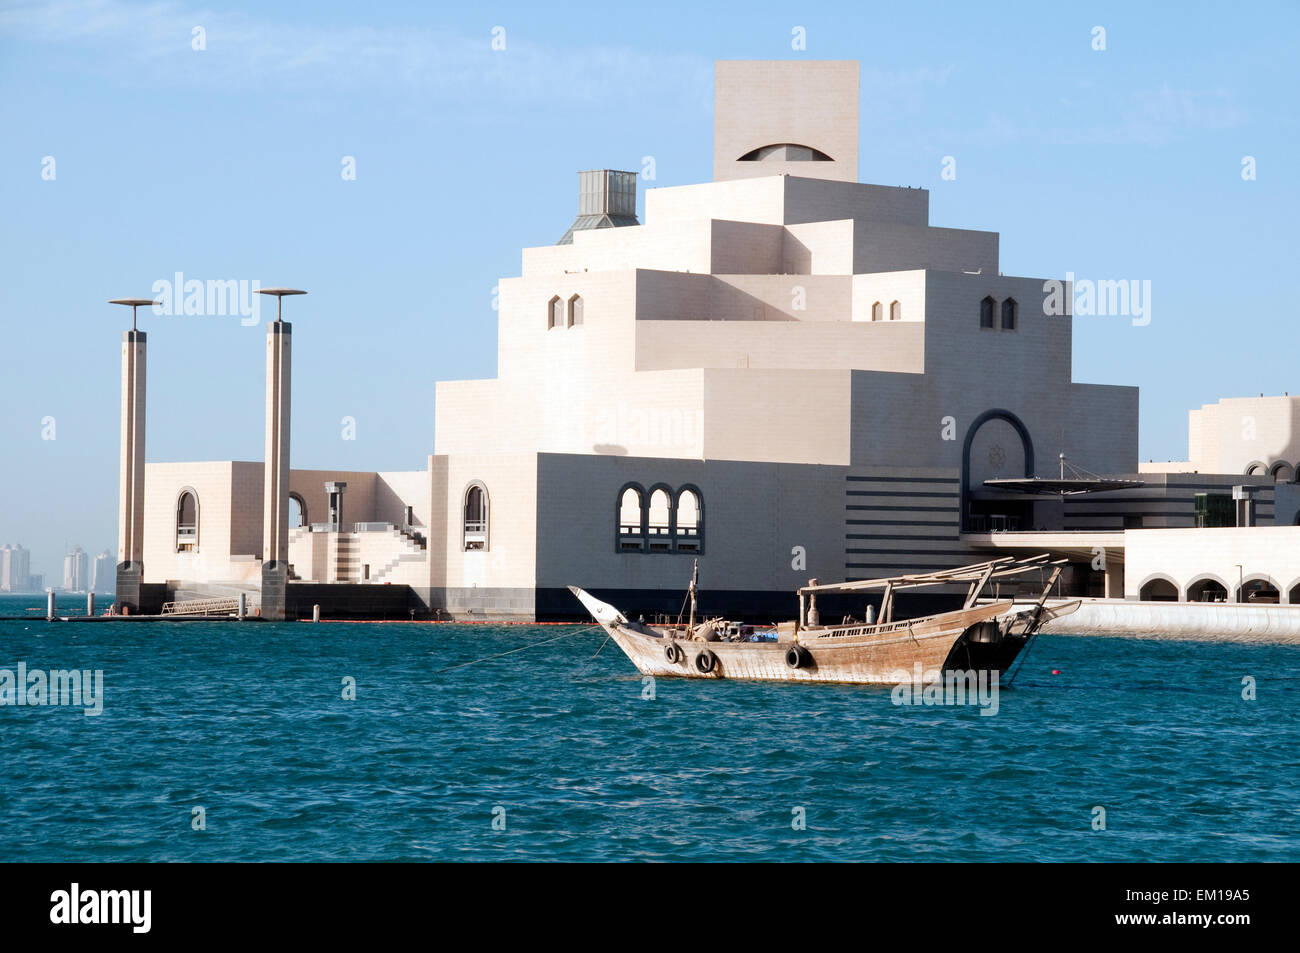 A dhow boat floats on the Arabian Gulf in front of the Museum of Islamic Art in Doha, Qatar. Stock Photo